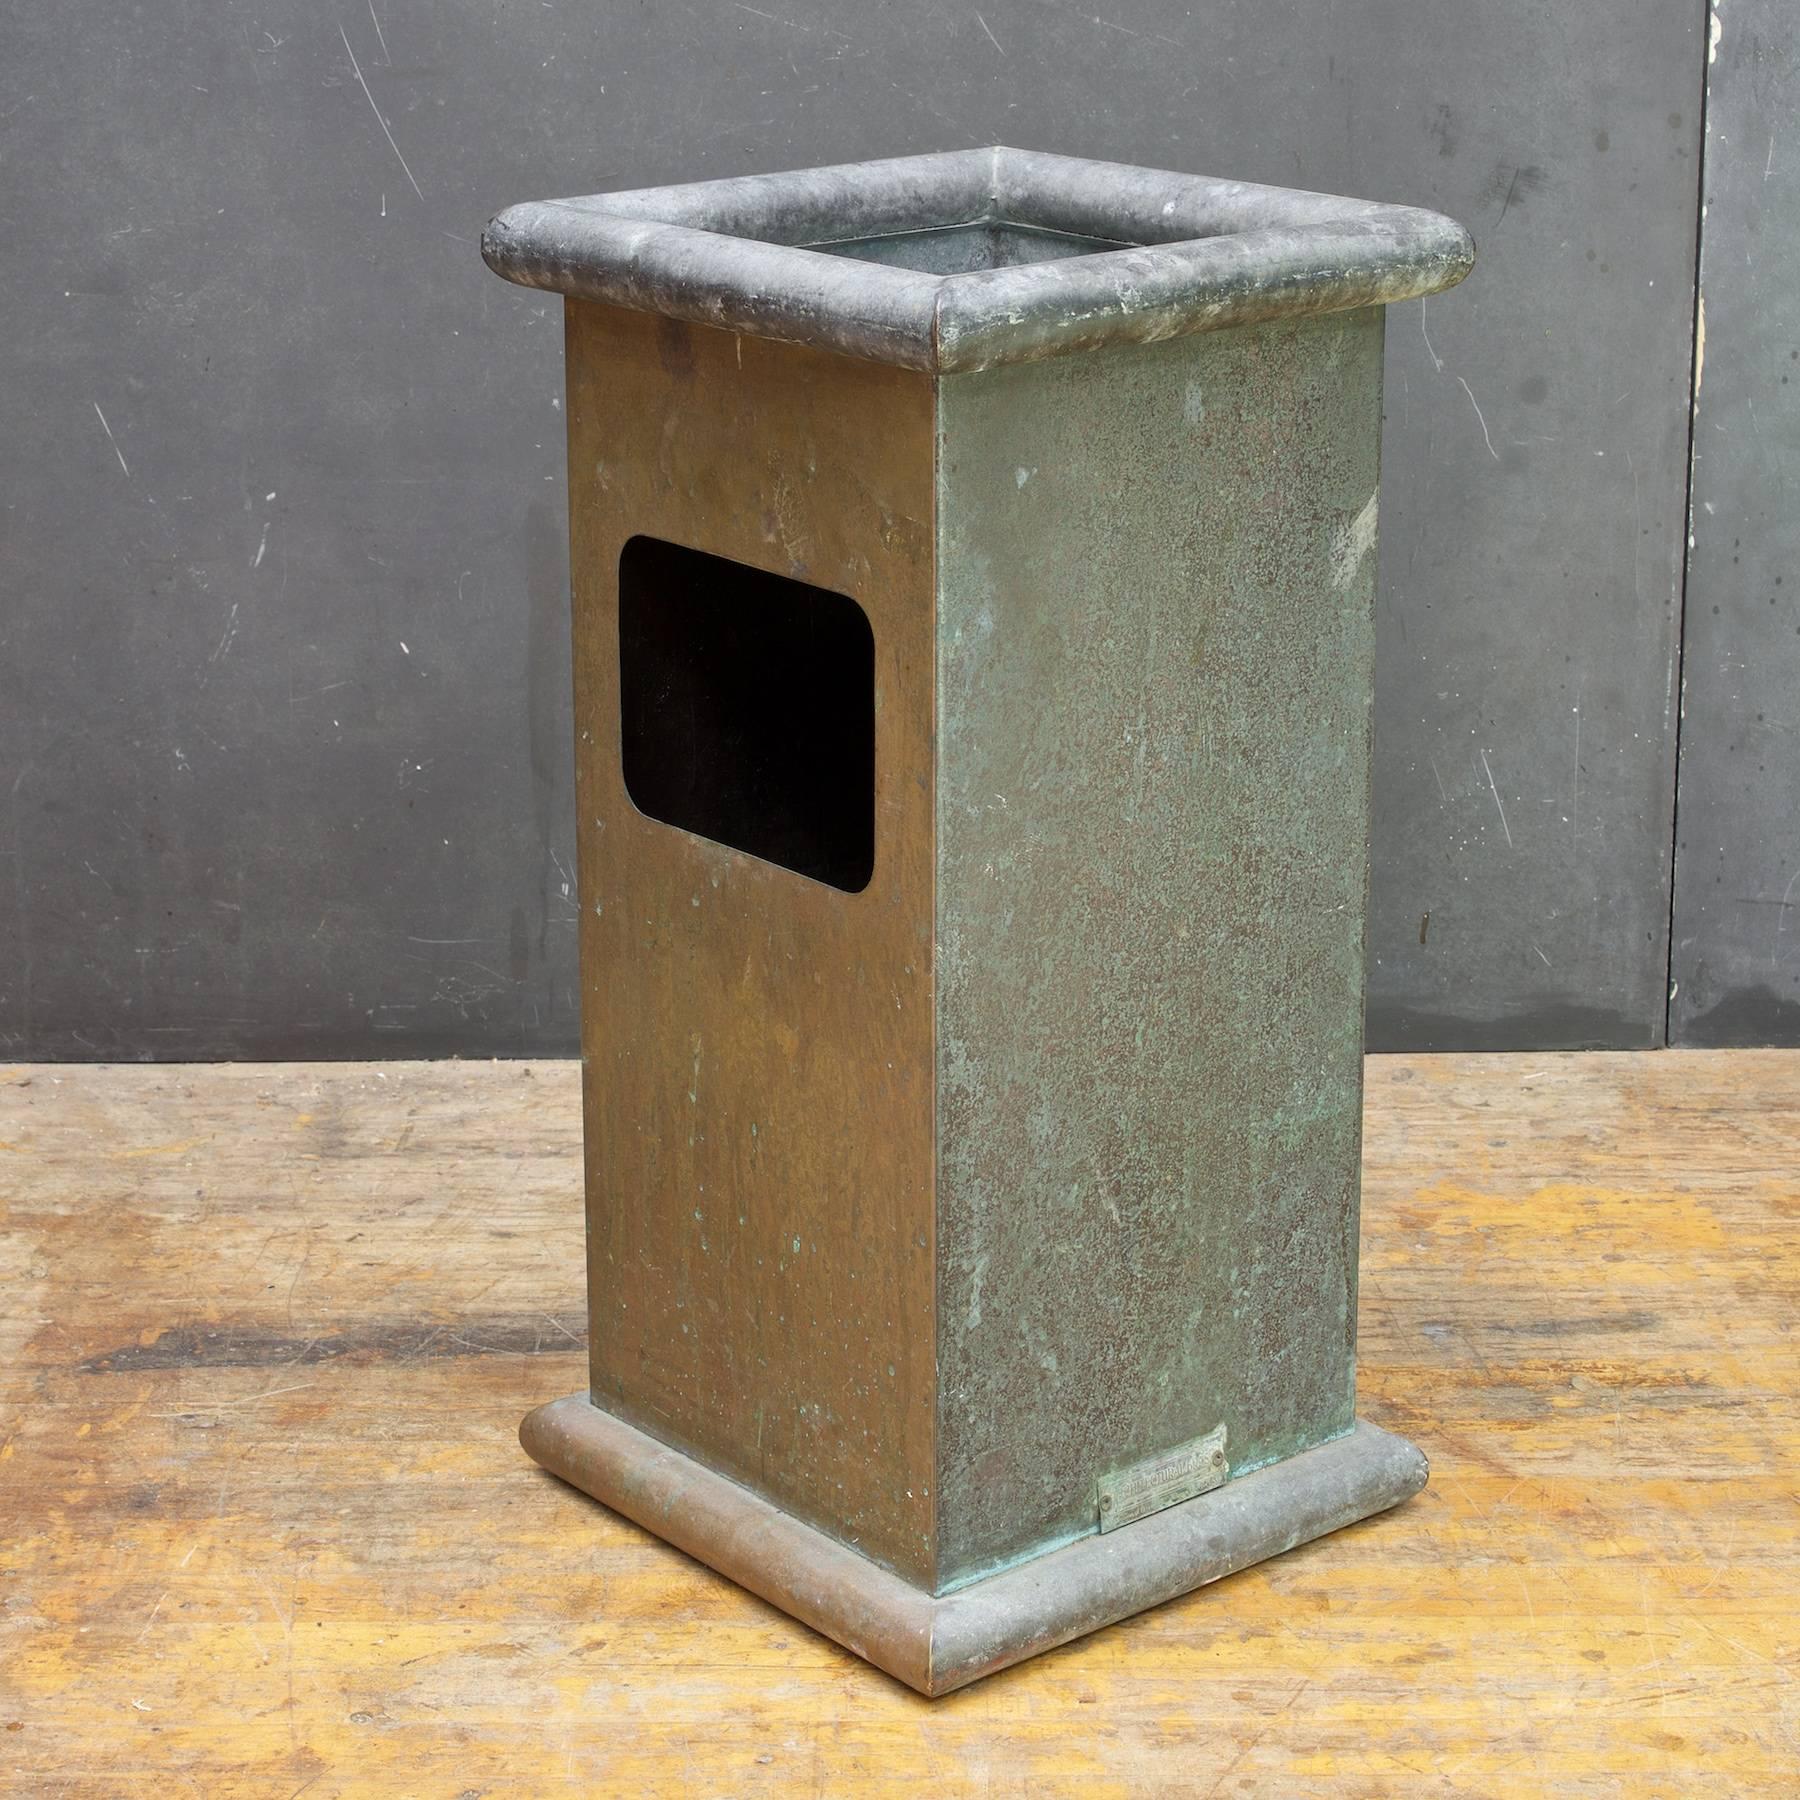 Architect designed trash can ashtray.
Measures: W 12 x D 12 x H 24 in. (Dish Depth: 3 in).